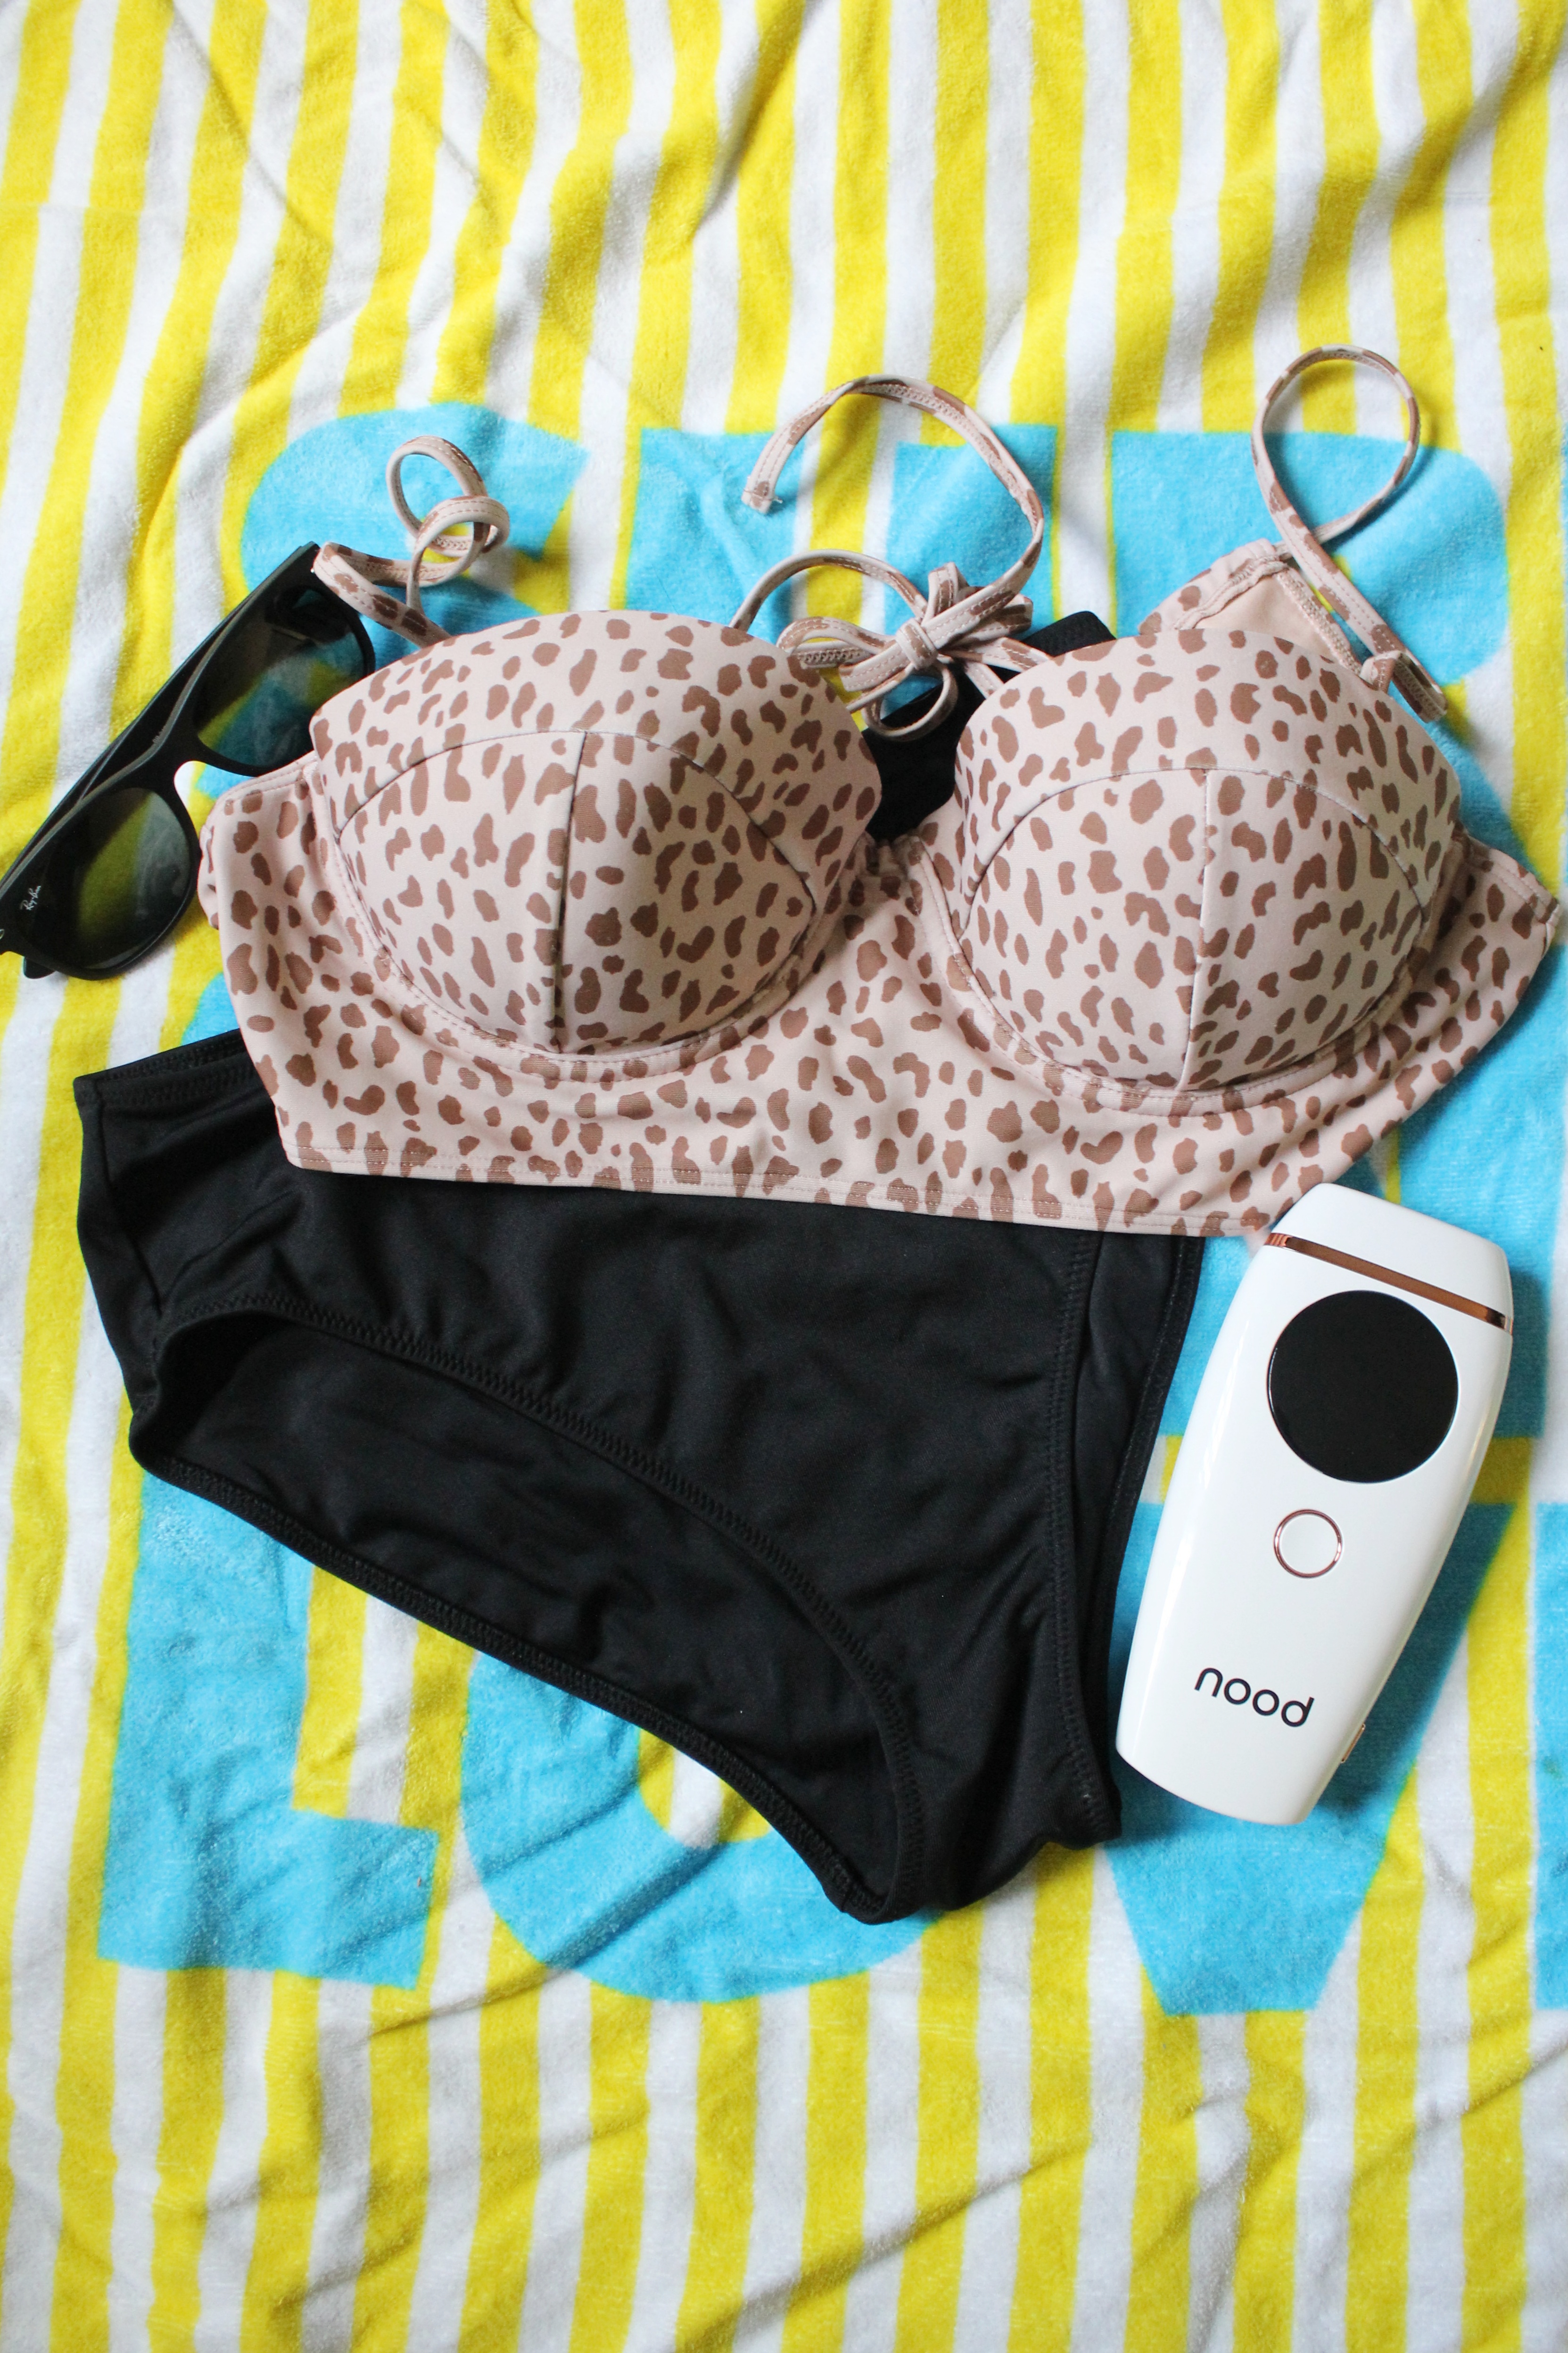 Swimsuit Season is Upon Us–Get (& Stay) Bikini-Ready With This Device